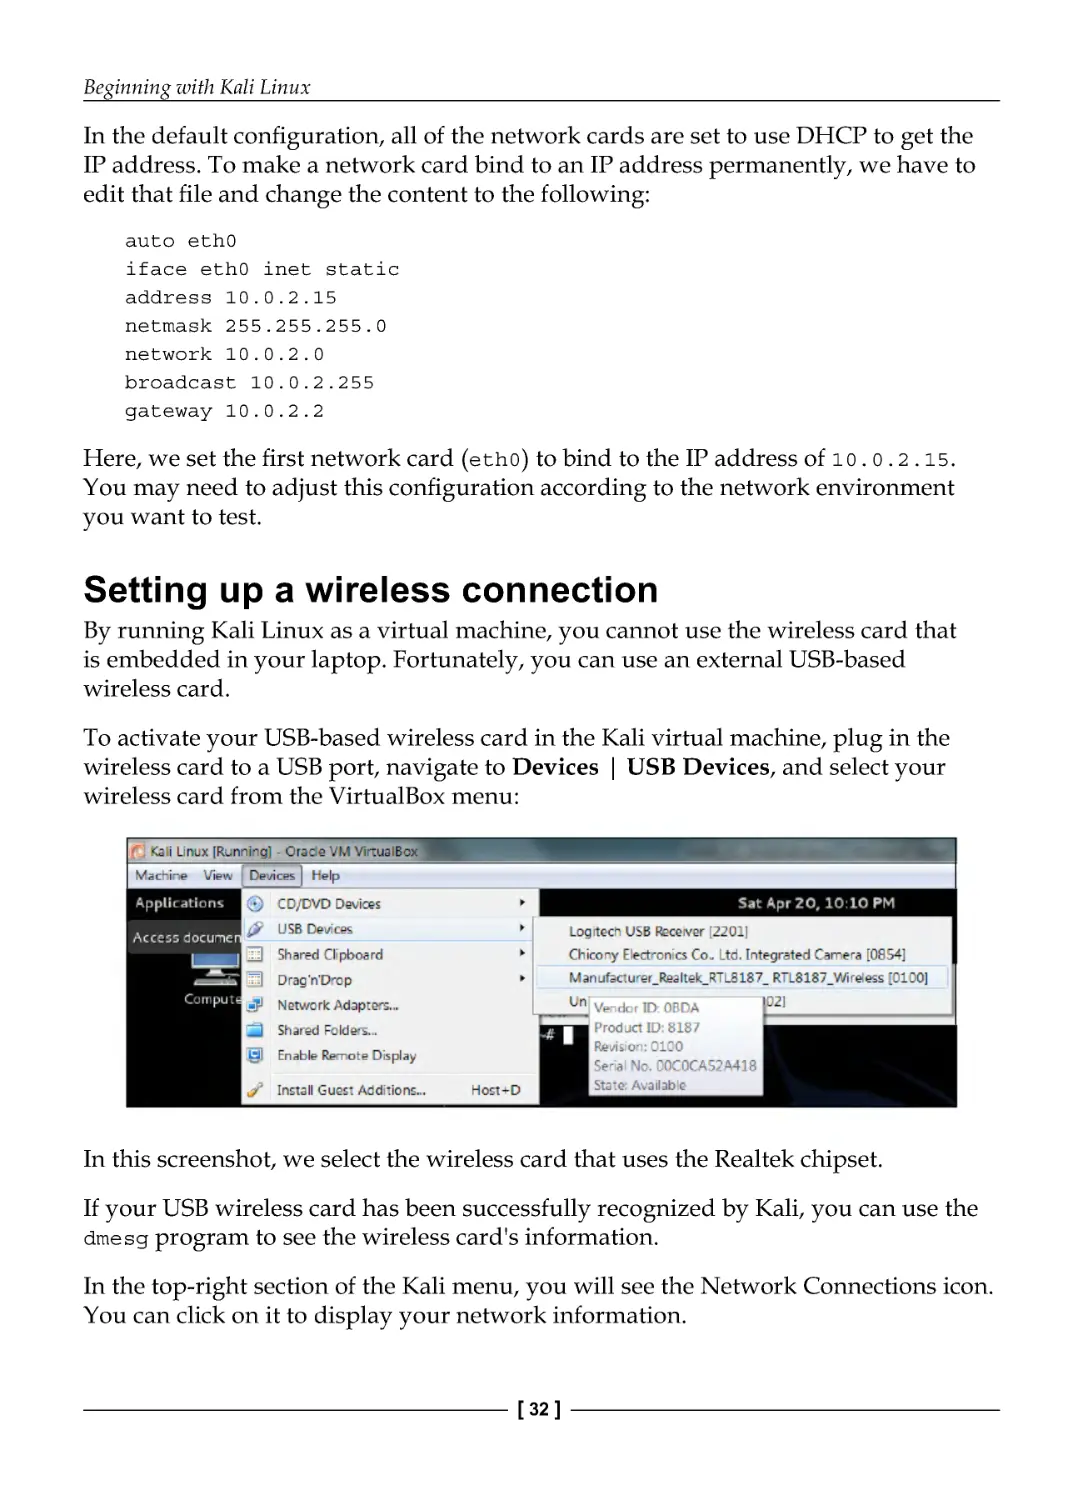 Setting up a wireless connection